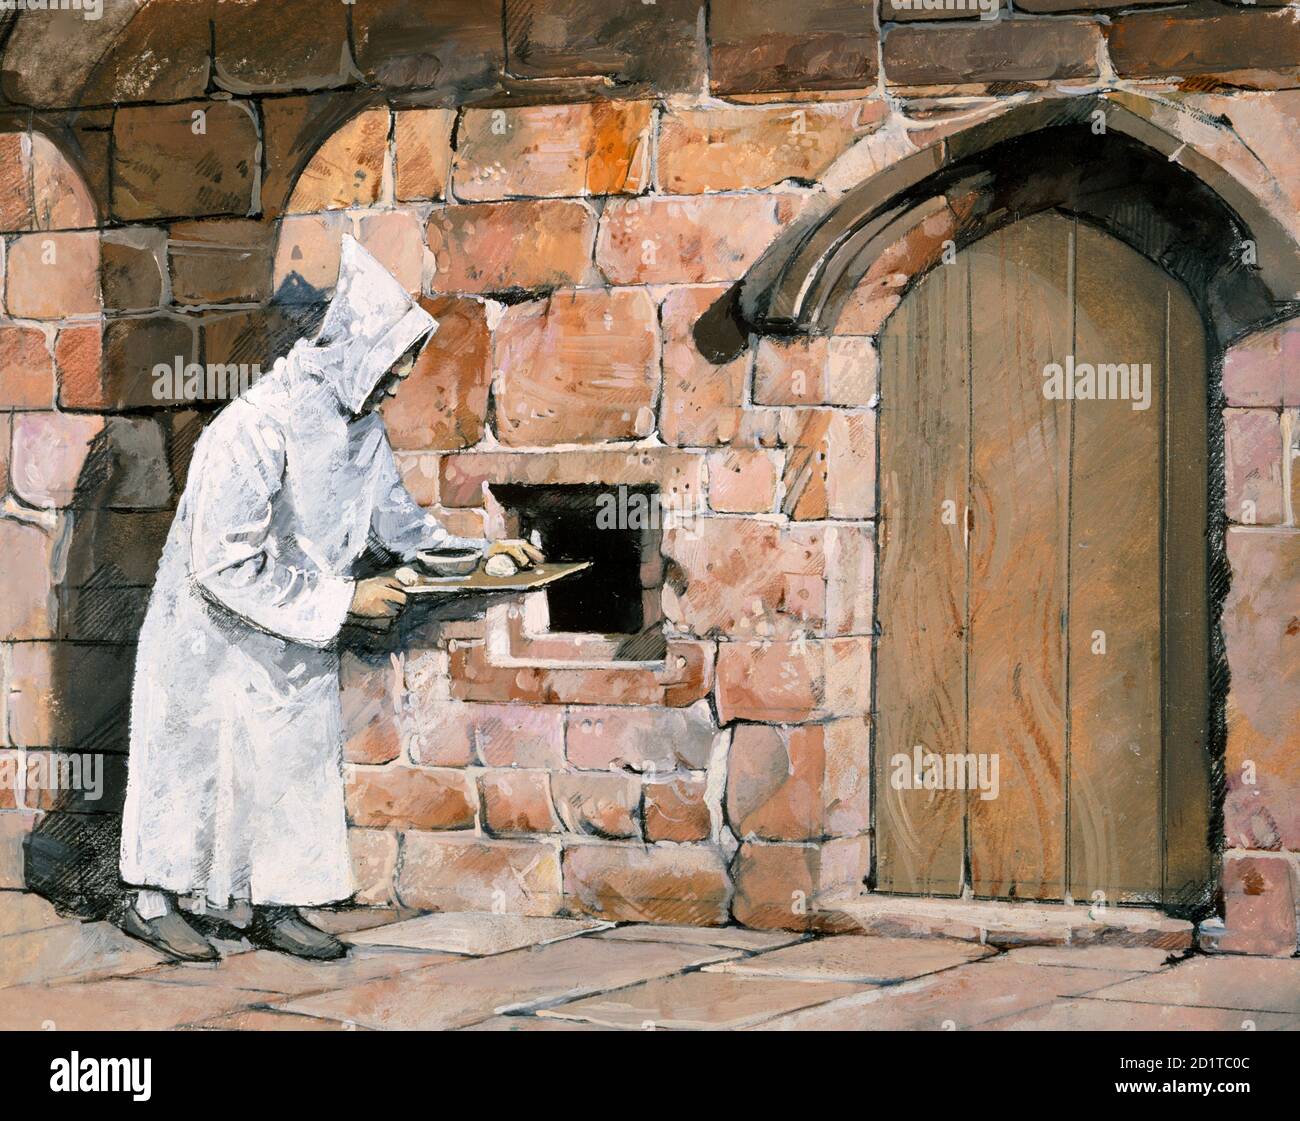 MOUNT GRACE PRIORY, North Yorkshire. Reconstruction drawing by Ivan Lapper of lay brother bringing food to a monk's cell. Stock Photo